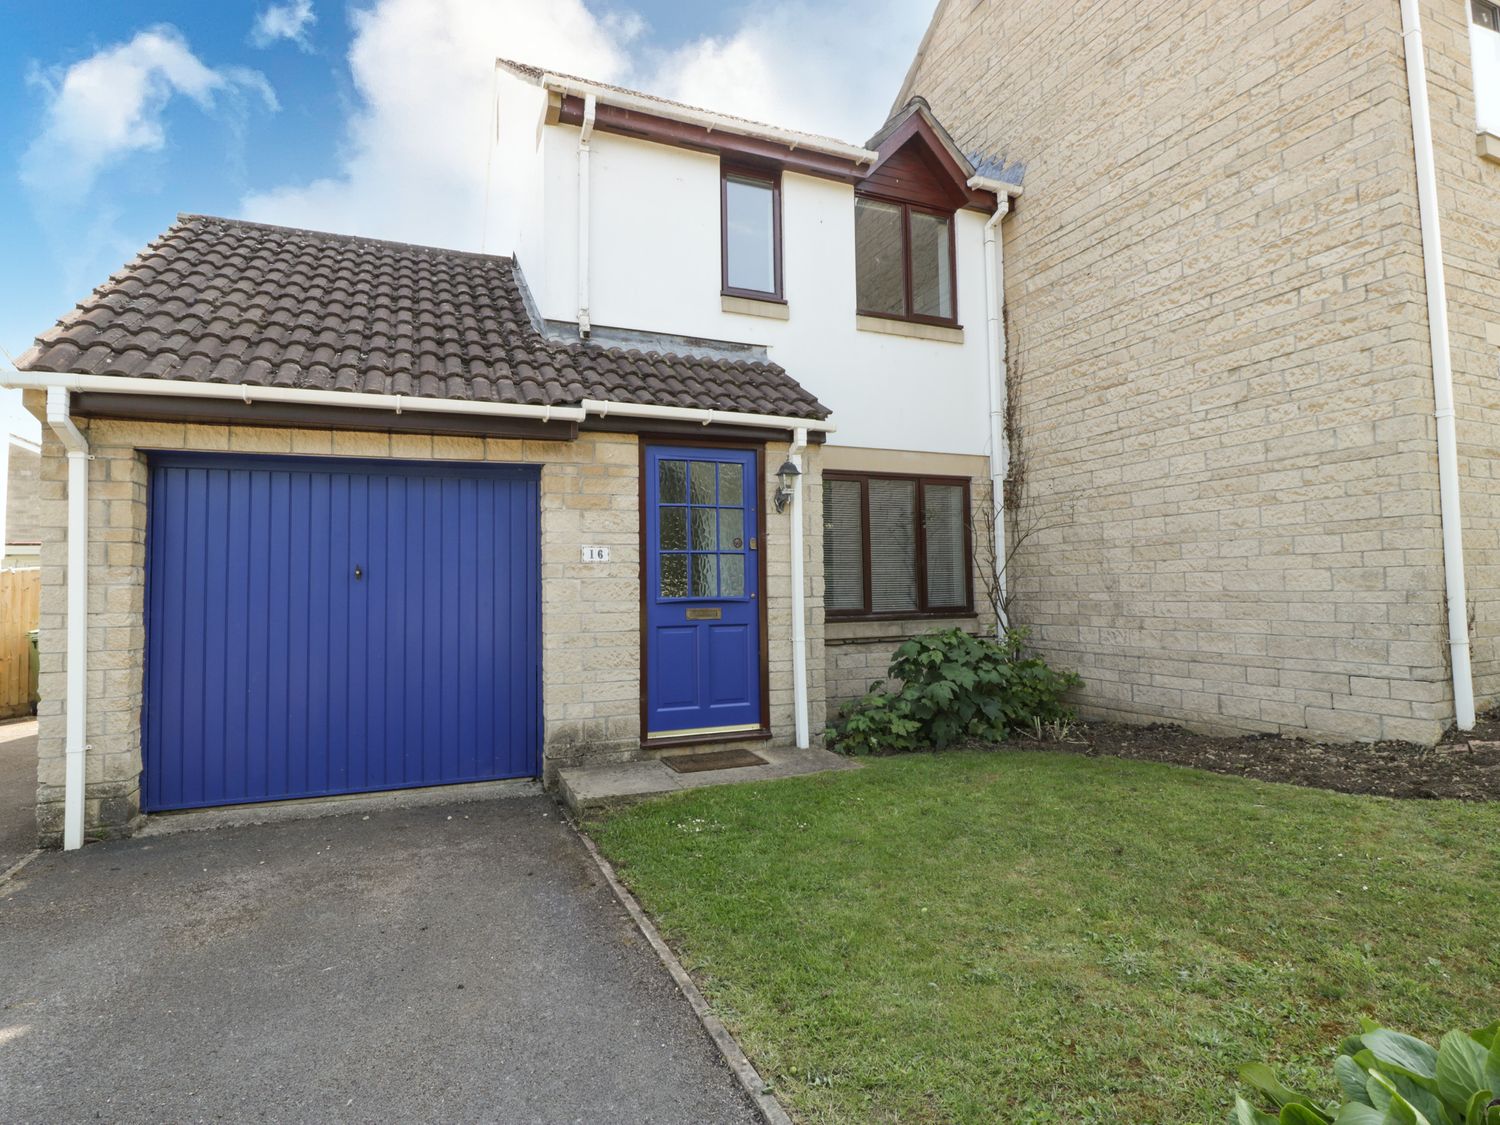 16 Mythern Meadow - Somerset & Wiltshire - 1071494 - photo 1